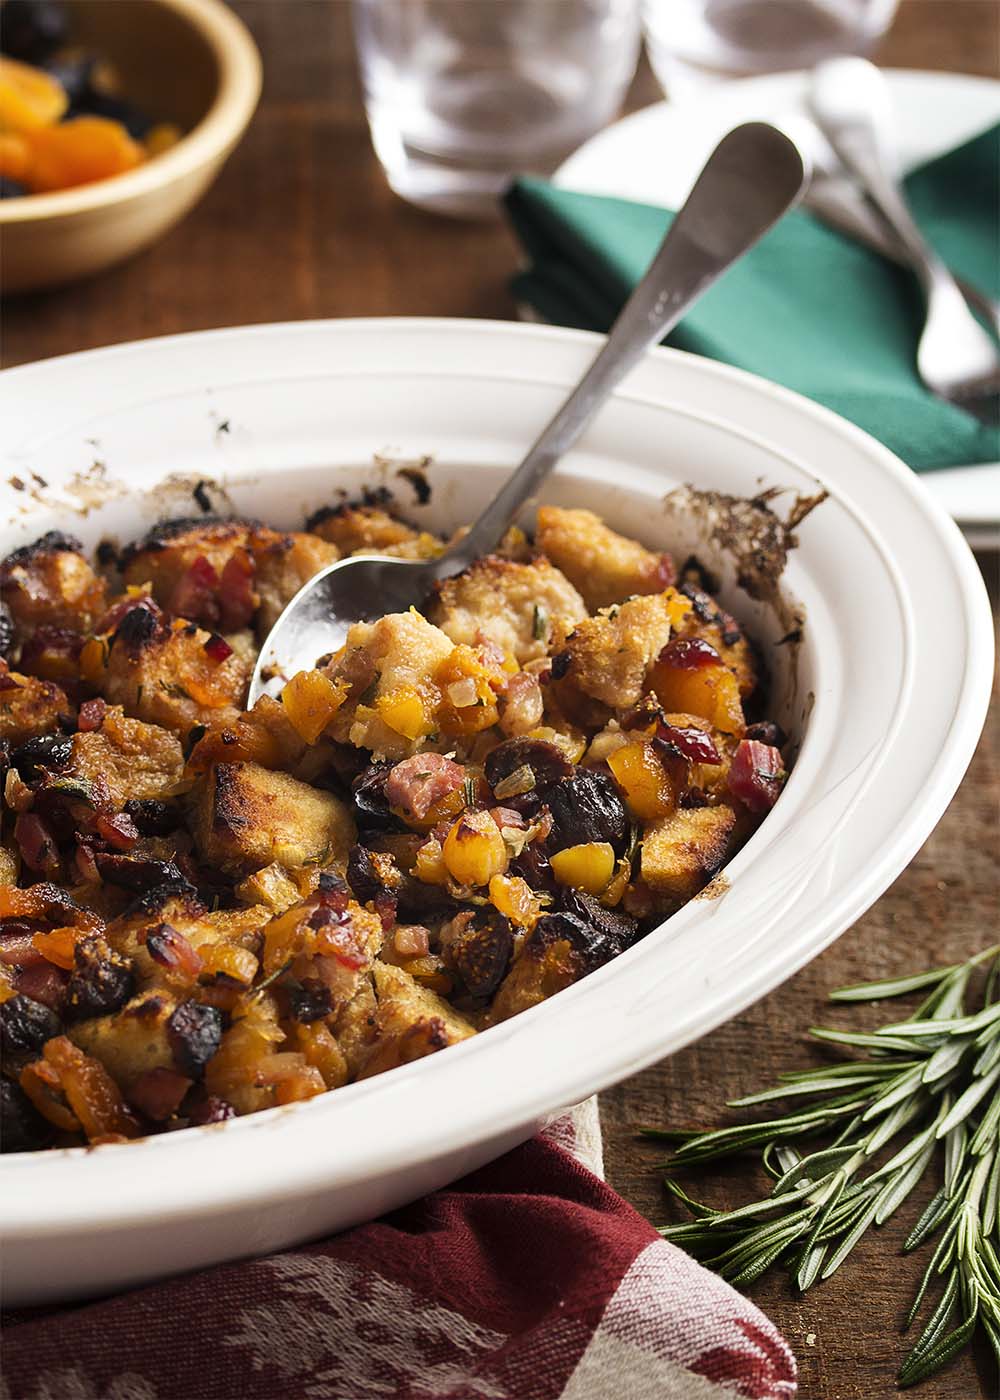 This stuffing is full of apricots, figs, and cranberries all tossed with sourdough bread cubes and flavored with pancetta and rosemary. A great accompaniment to roast pork! | justalittlebitofbacon.com